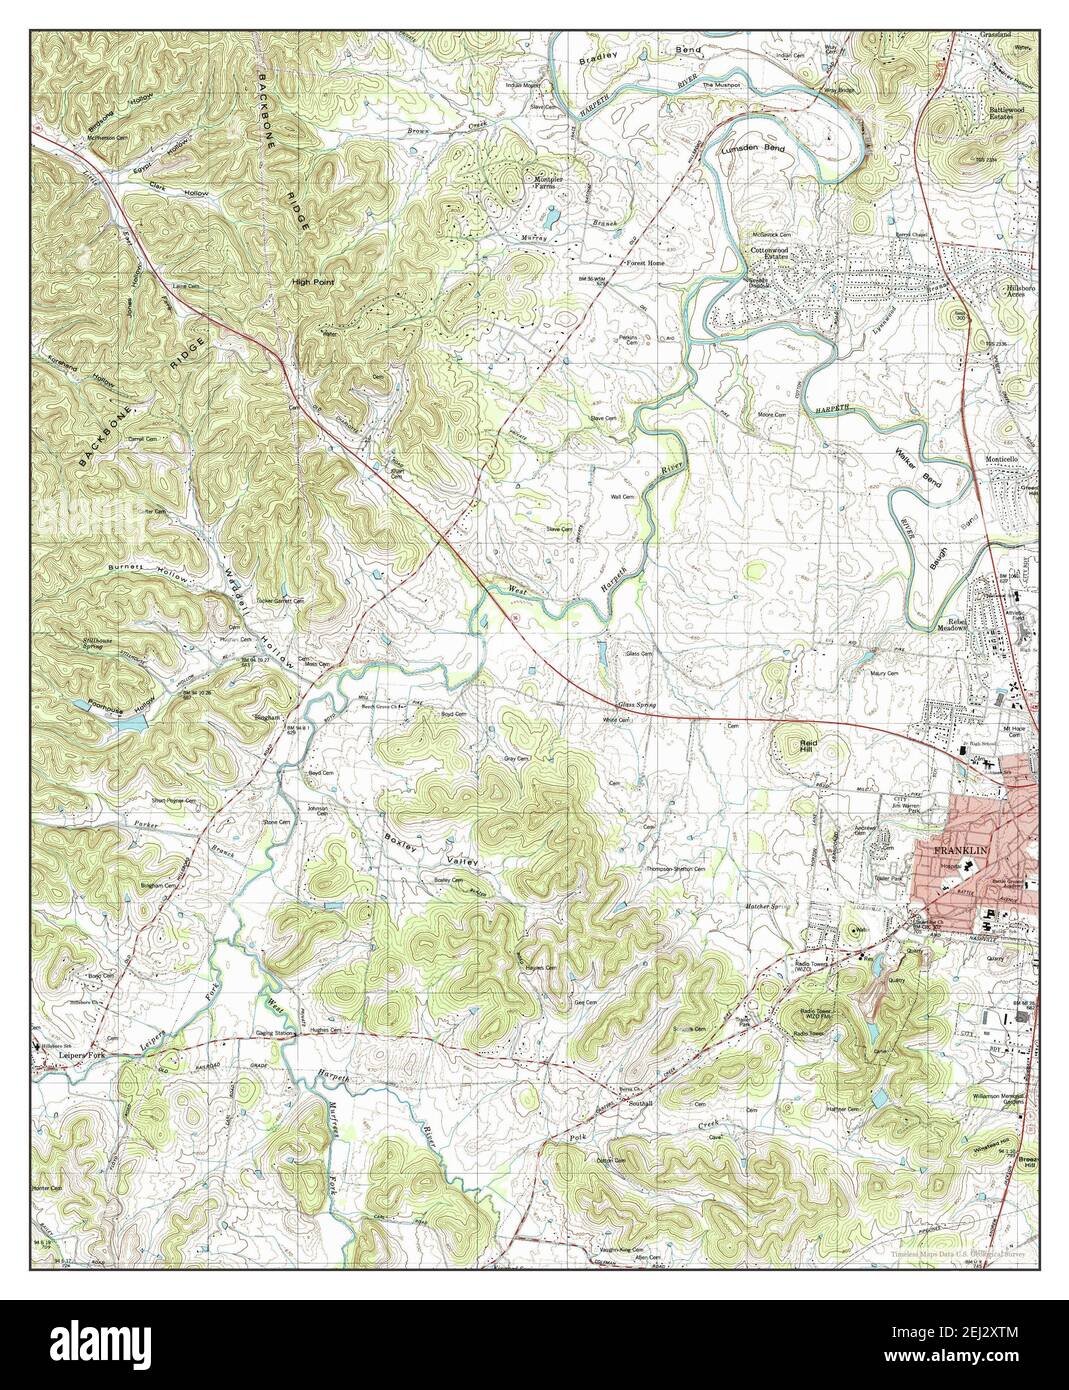 Leipers Fork, Tennessee, map 1981, 1:24000, United States of America by Timeless Maps, data U.S. Geological Survey Stock Photo